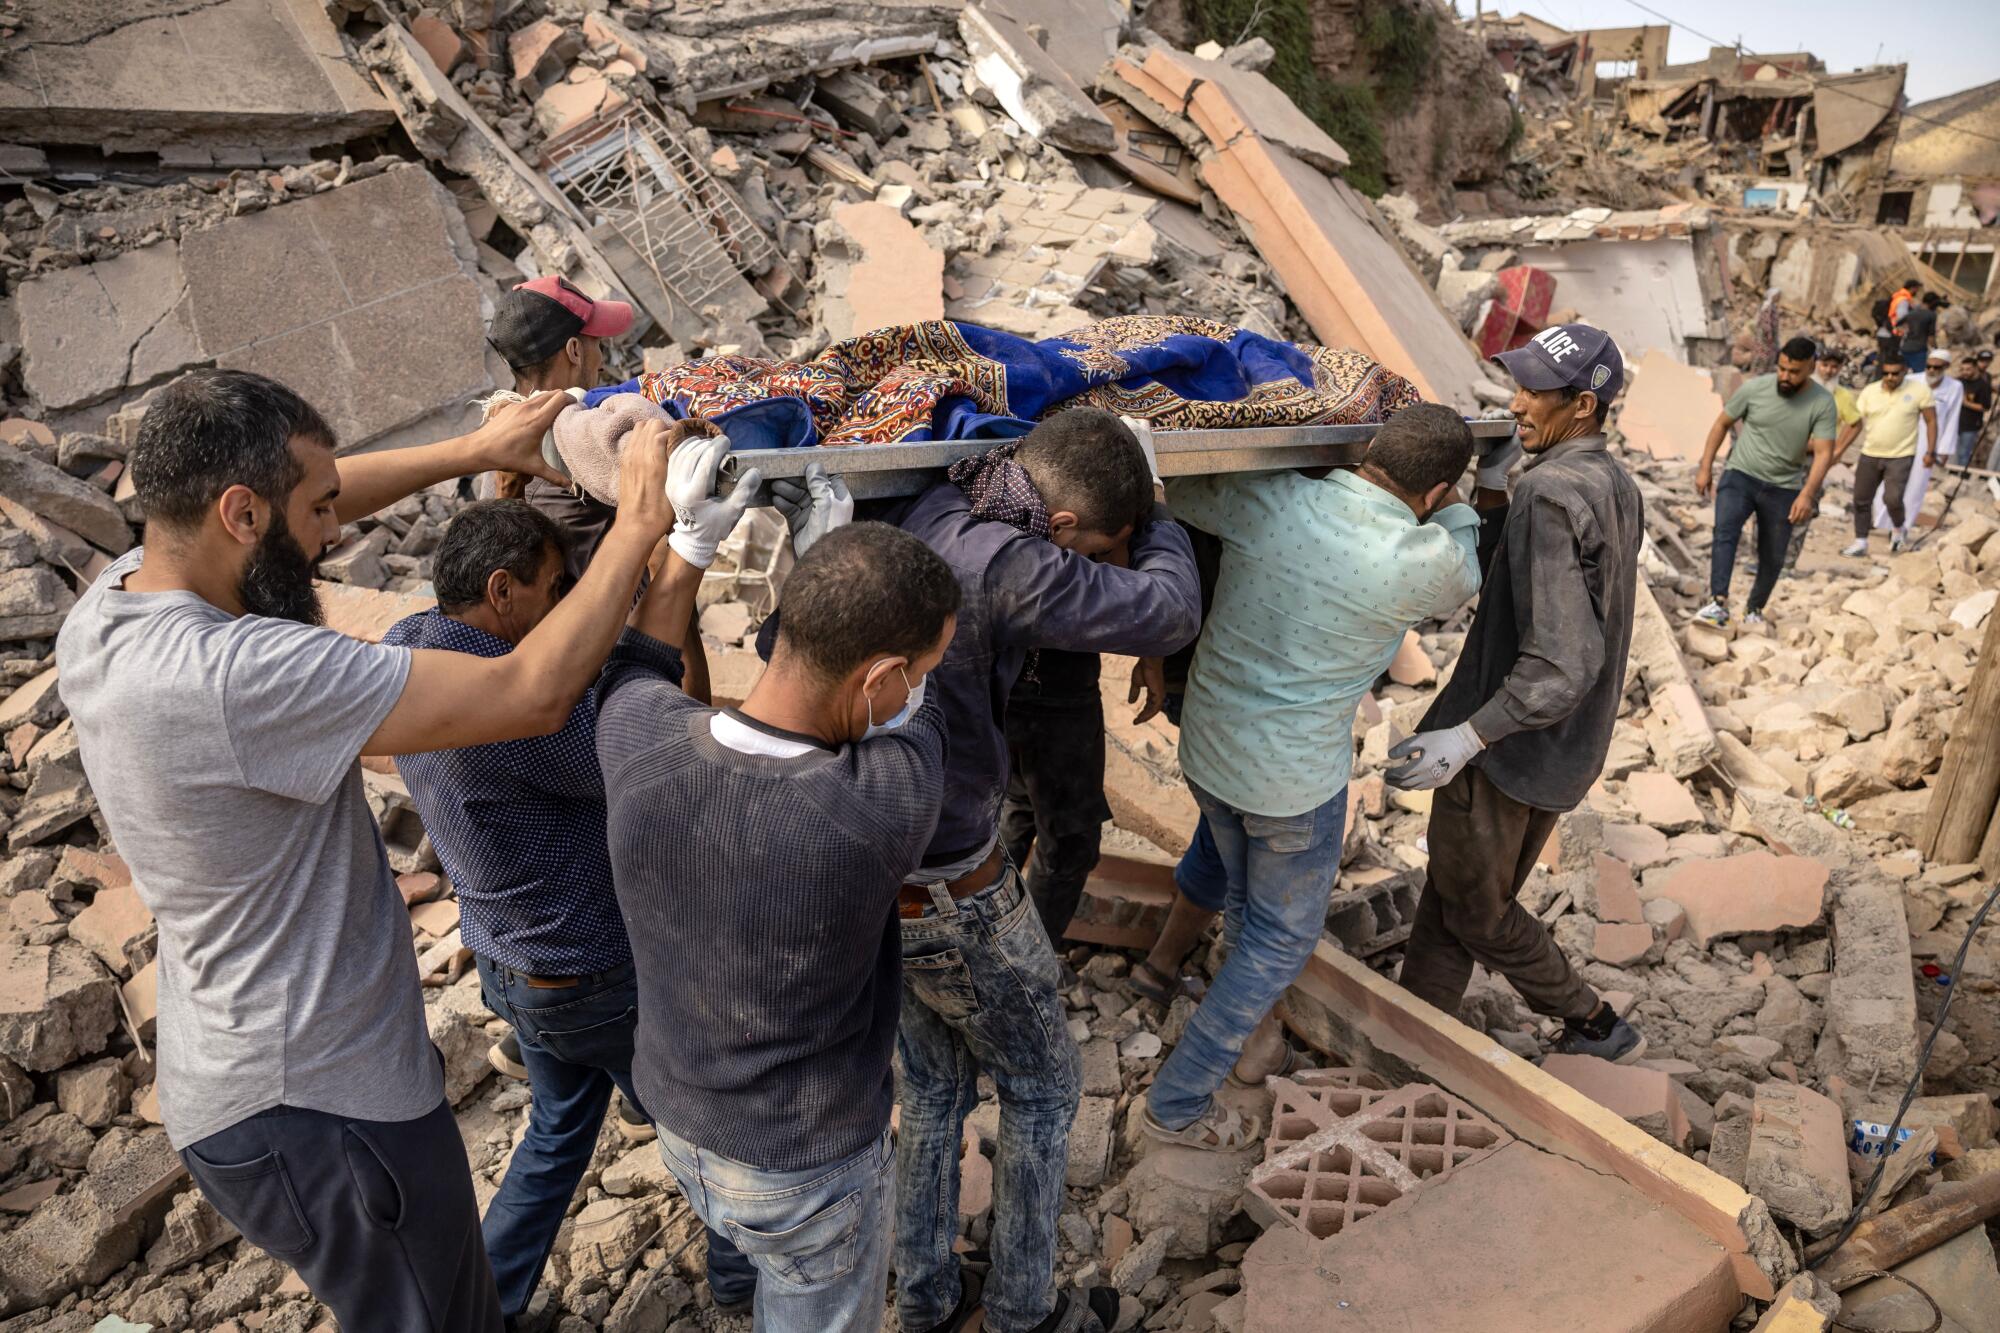 People carry the remains of a victim as they walk over rubble among collapsed buildings.